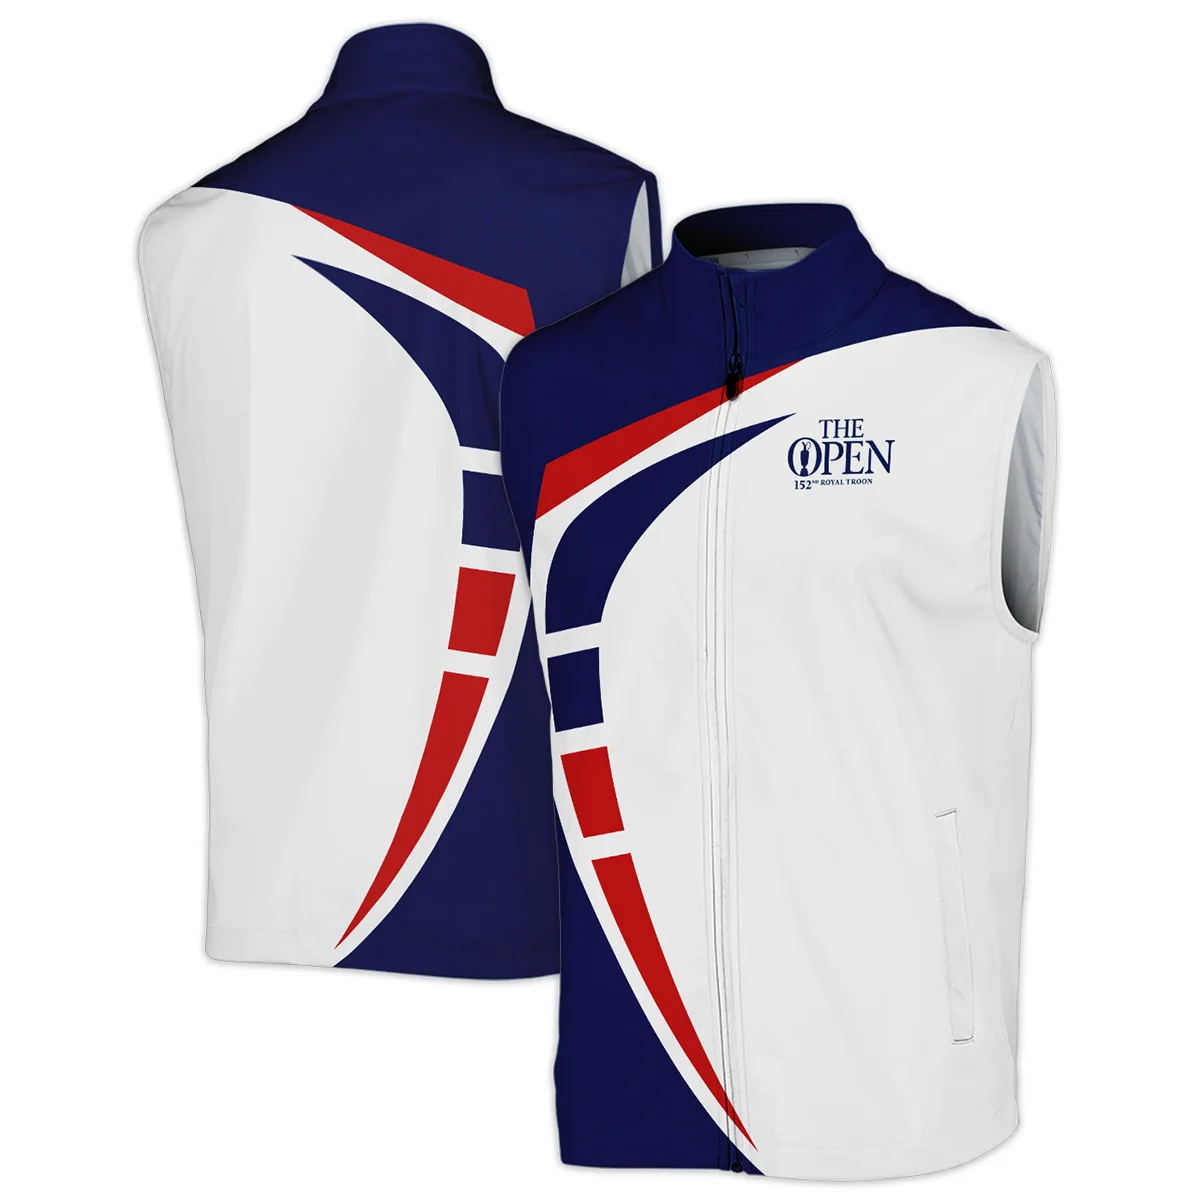 152nd Open Championship Callaway White Blue Red Pattern Background Zipper Hoodie Shirt All Over Prints HOTOP270624A03CLWZHD